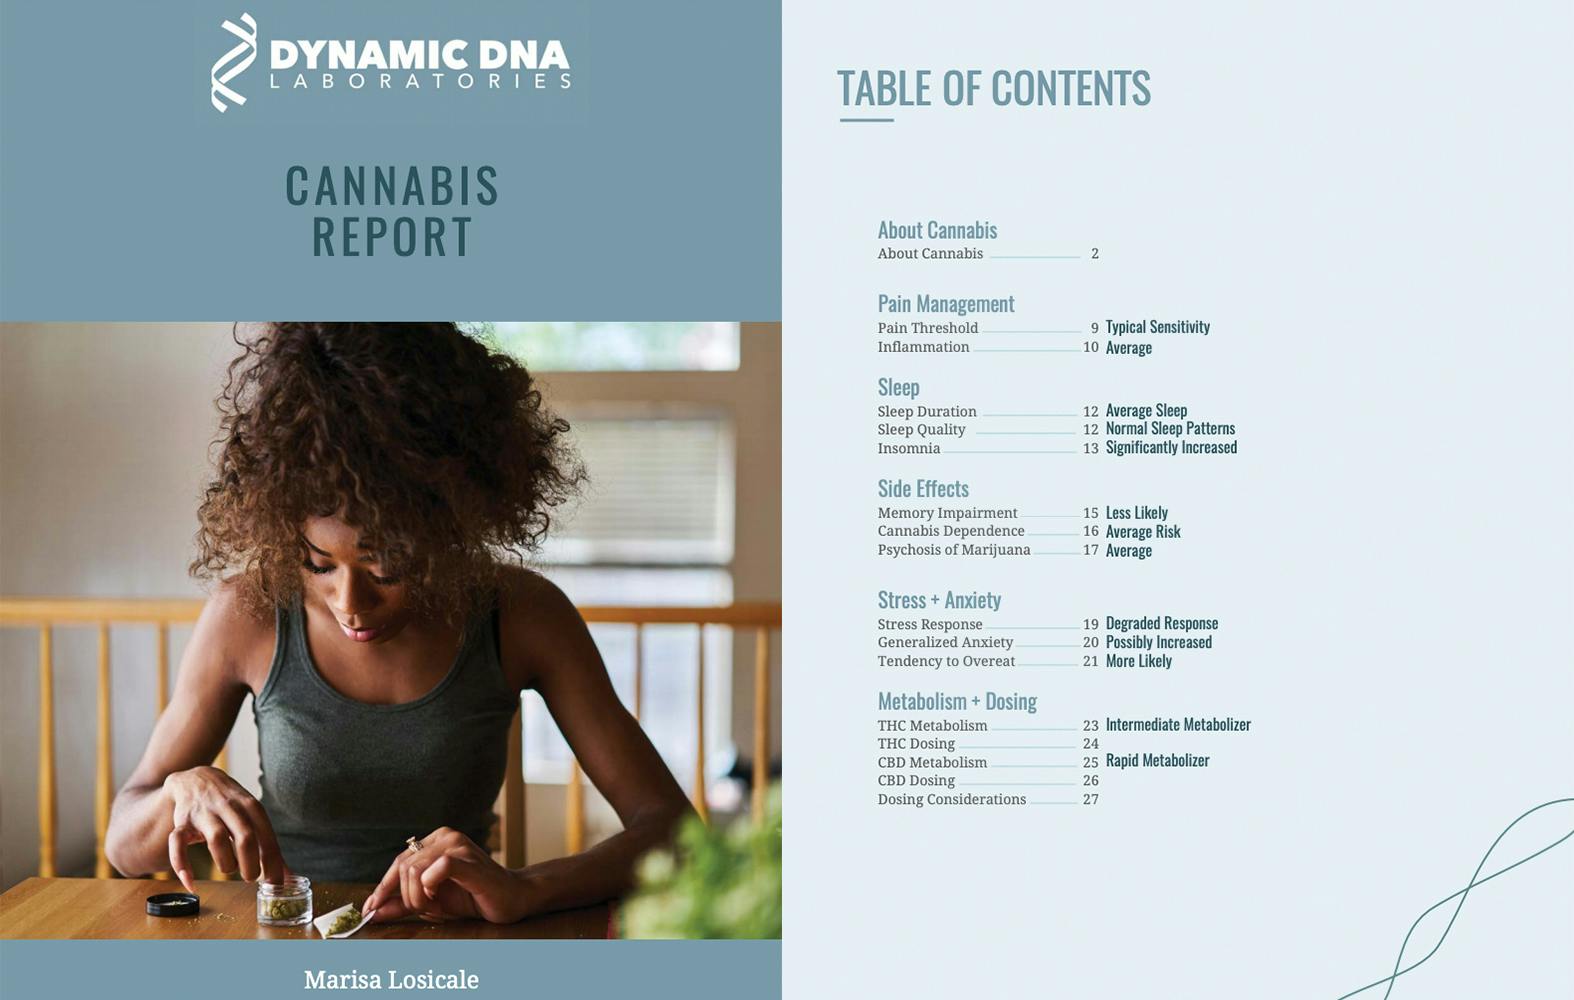 Introduction to Dynamic DNA Laboratories cannabis DNA test results